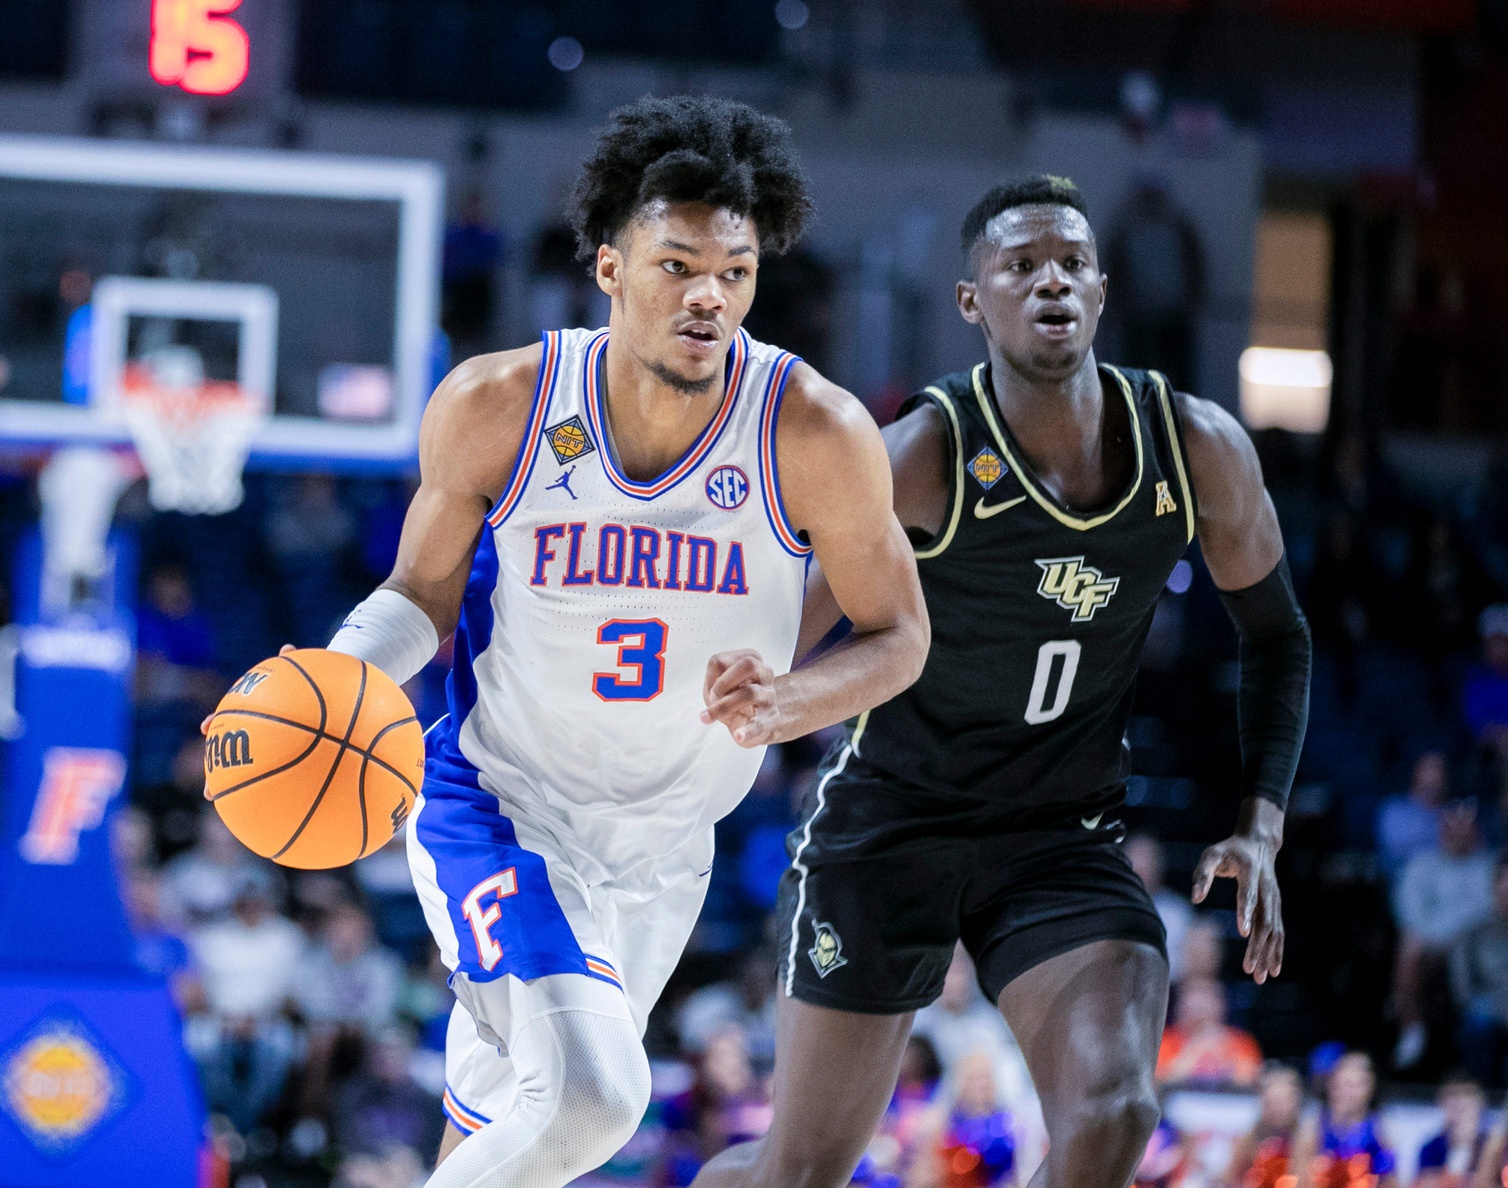 Florida Gators forward Alex Fudge (3) brings the ball down court during the second half of the NIT tournament Wednesday, March 15, 2023, at Exactech Arena in Gainesville, Fla. Florida lost to UCF 67-49. Alan Youngblood/Gainesville Sun Gai Ufucf3takeaways2 337354105434